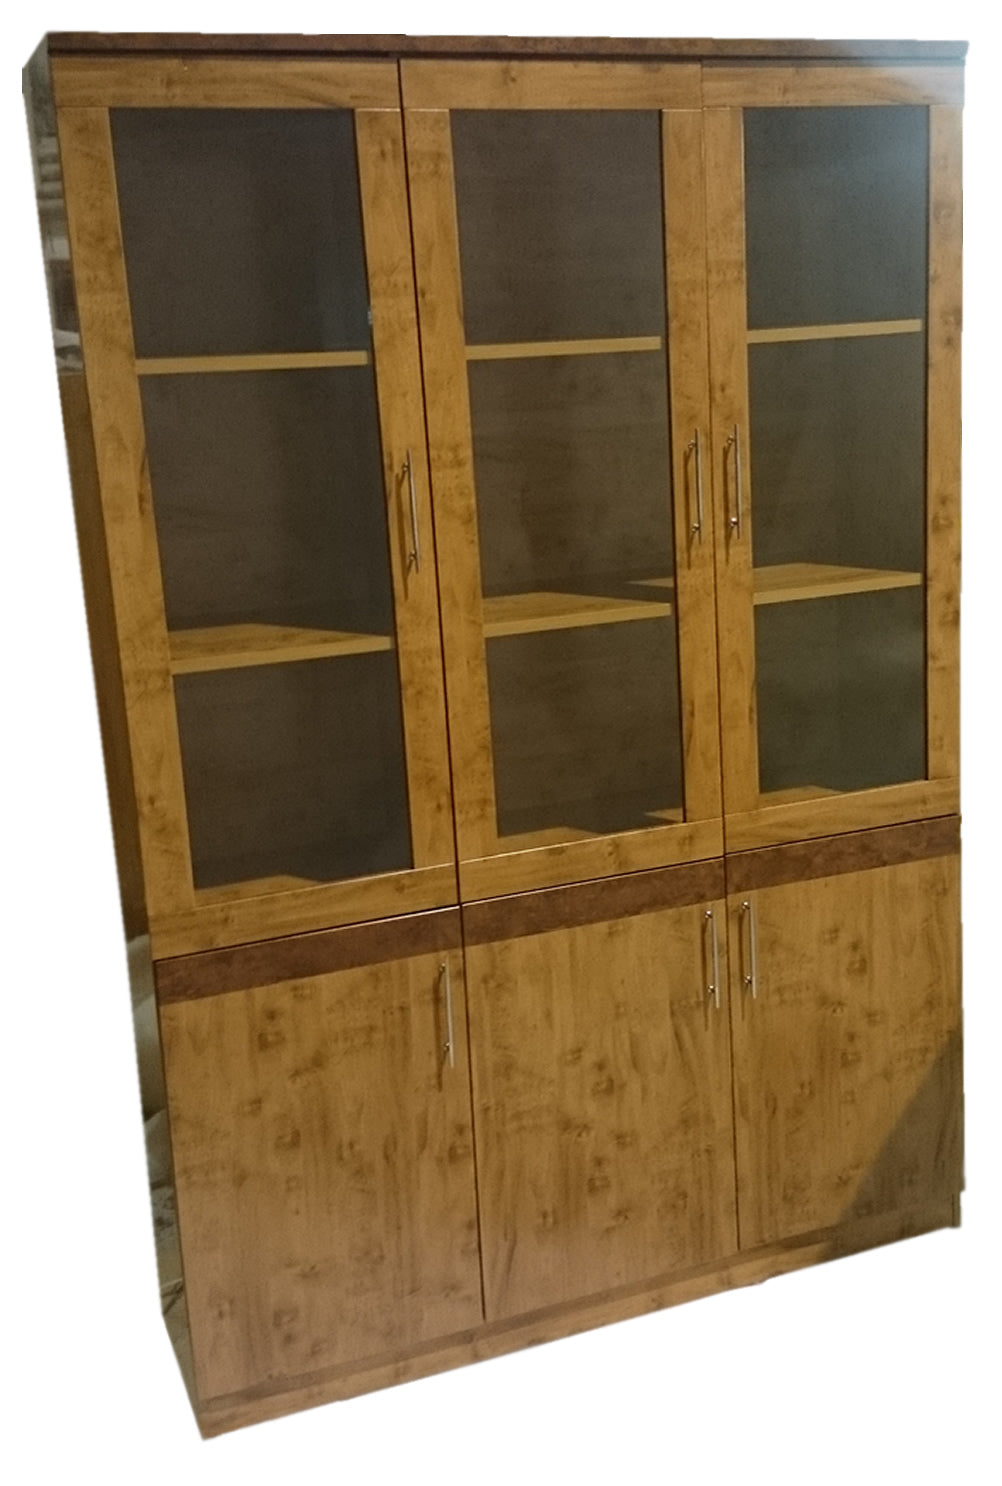 Yew Luxury Bookcase 3 Doors Wide DES-1862-192A-3DR Huddersfield